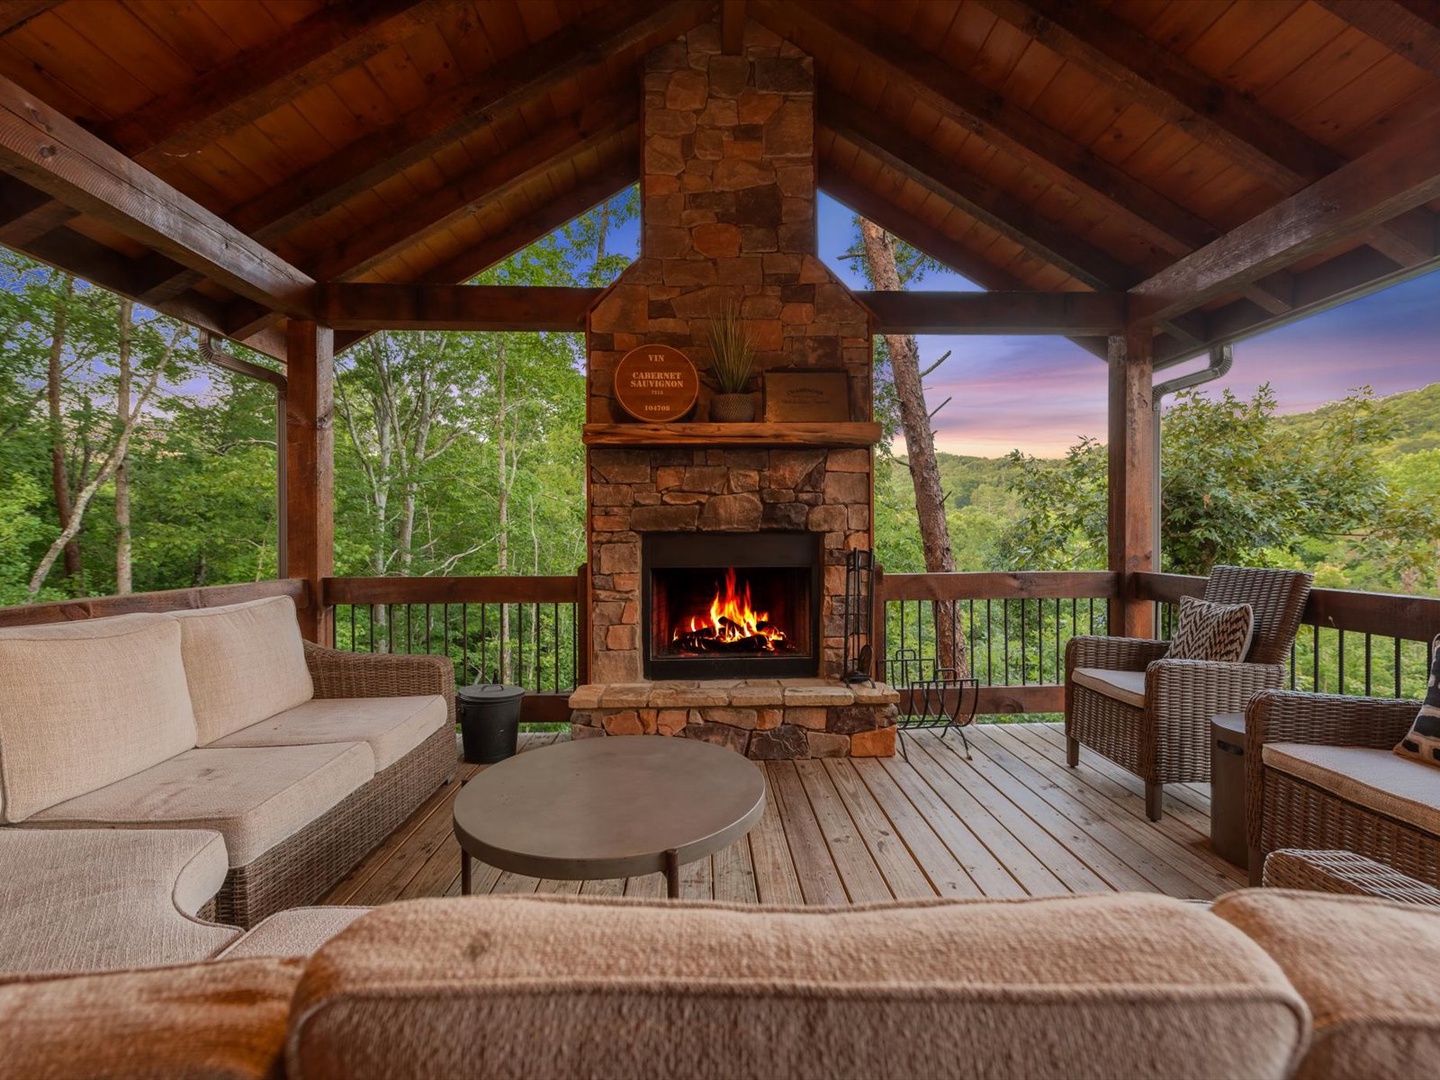 Whisky Creek Retreat- Entry deck fireplace with outdoor seating